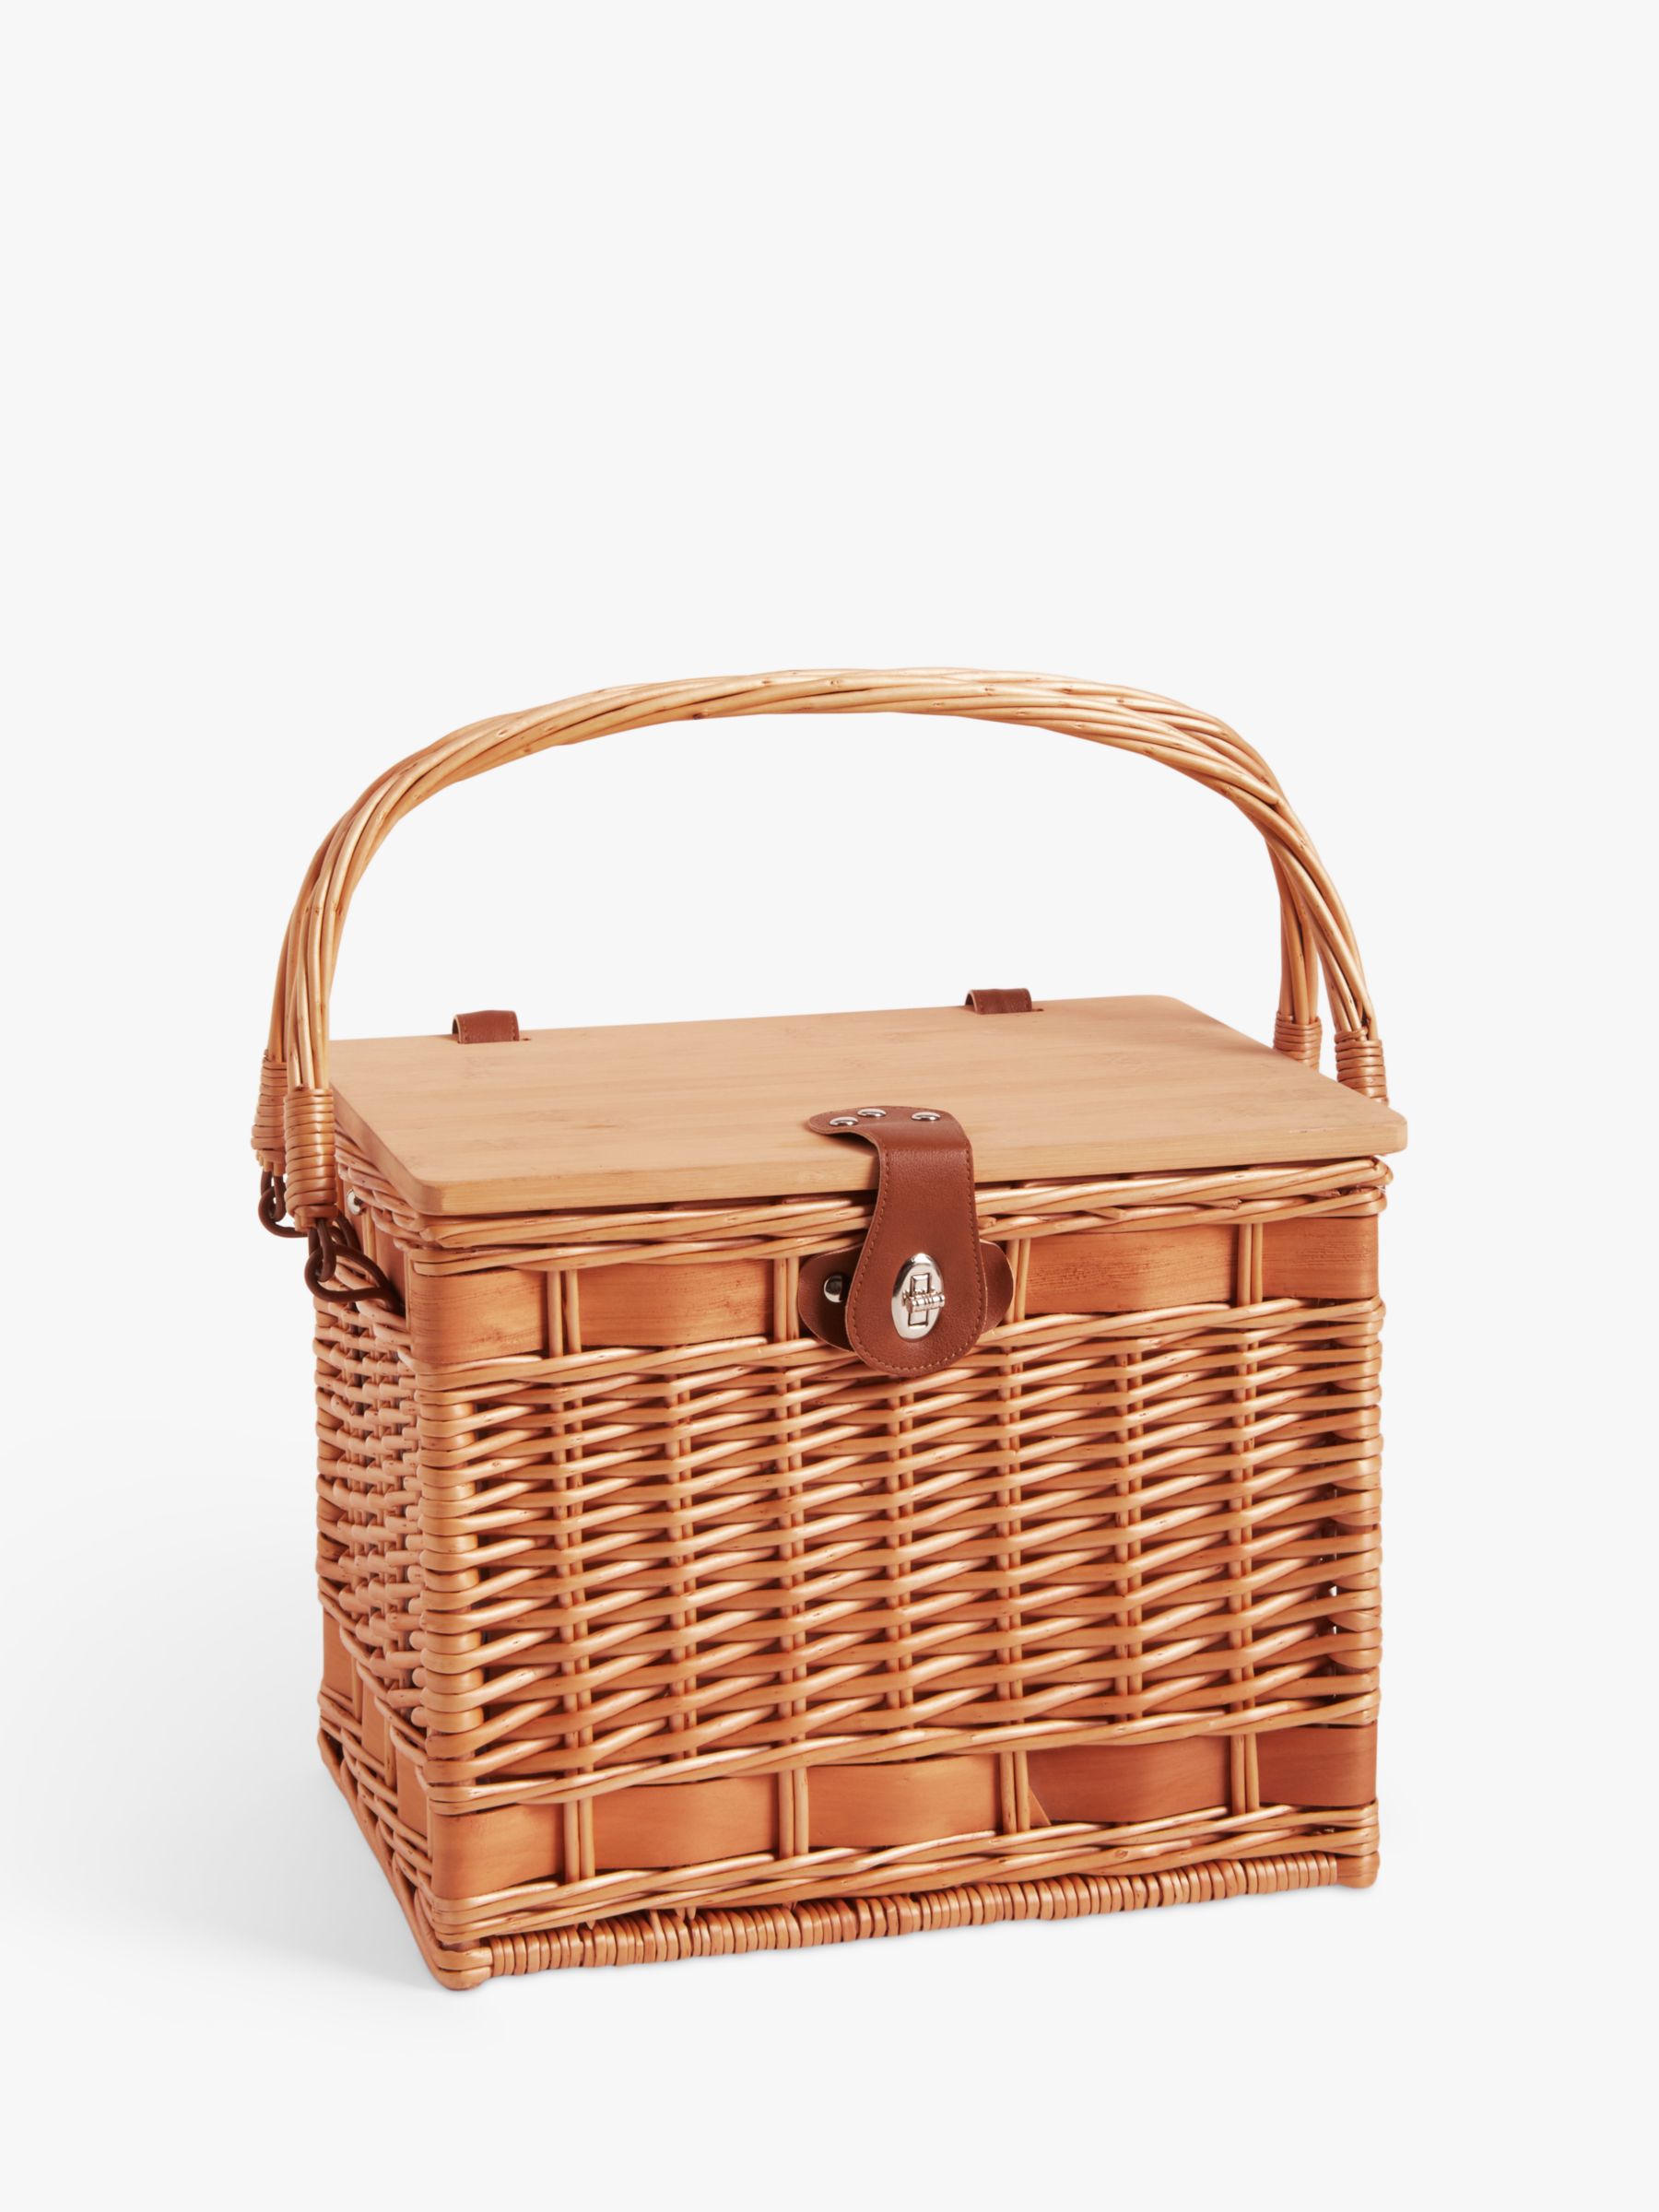 John Lewis Striped Filled Willow Wicker Picnic Hamper, 4 Person